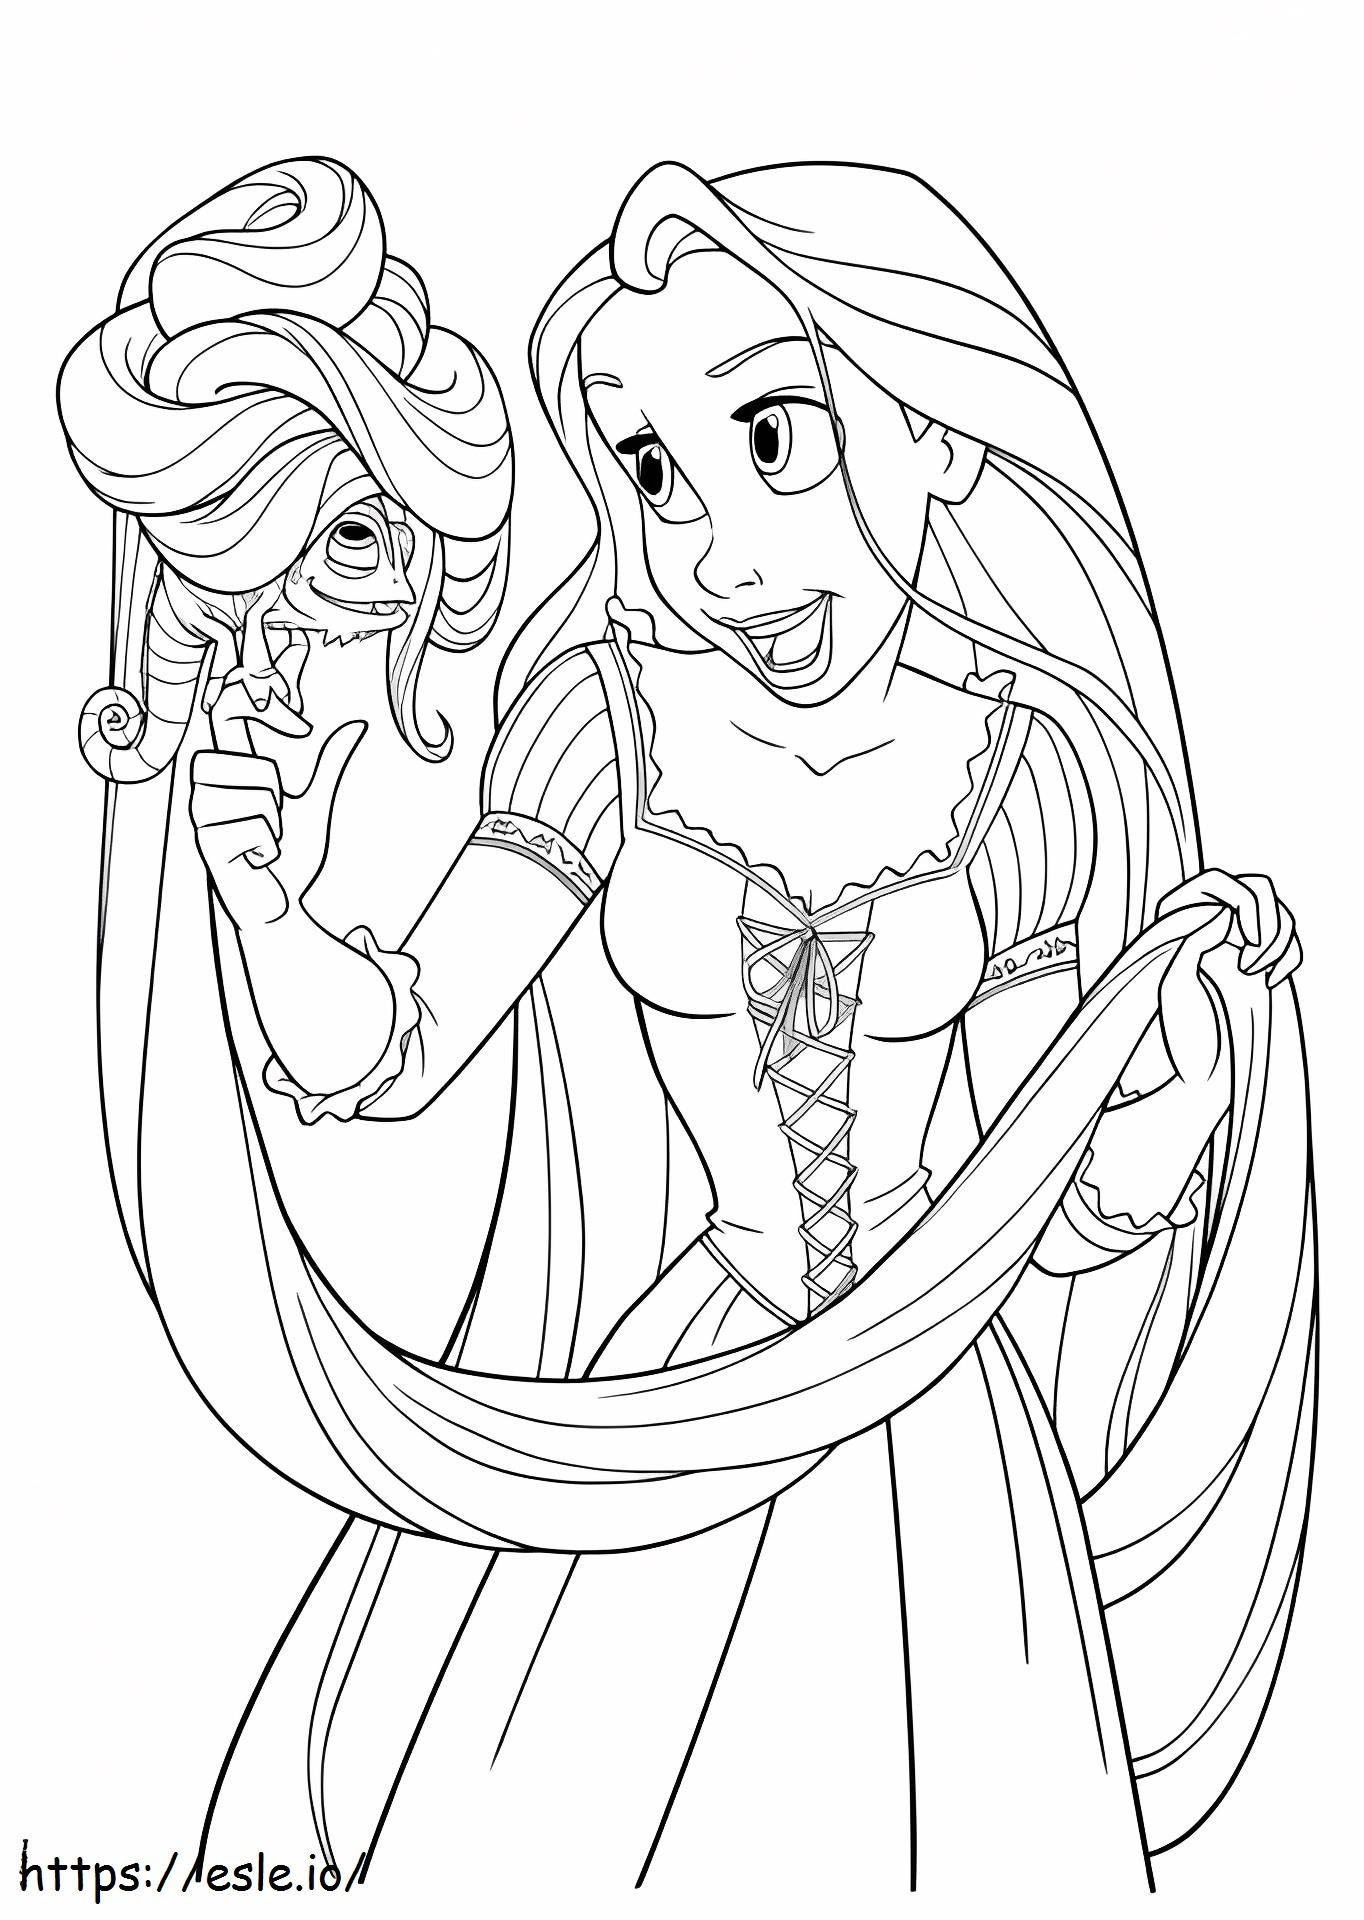 1530069429 16 coloring page